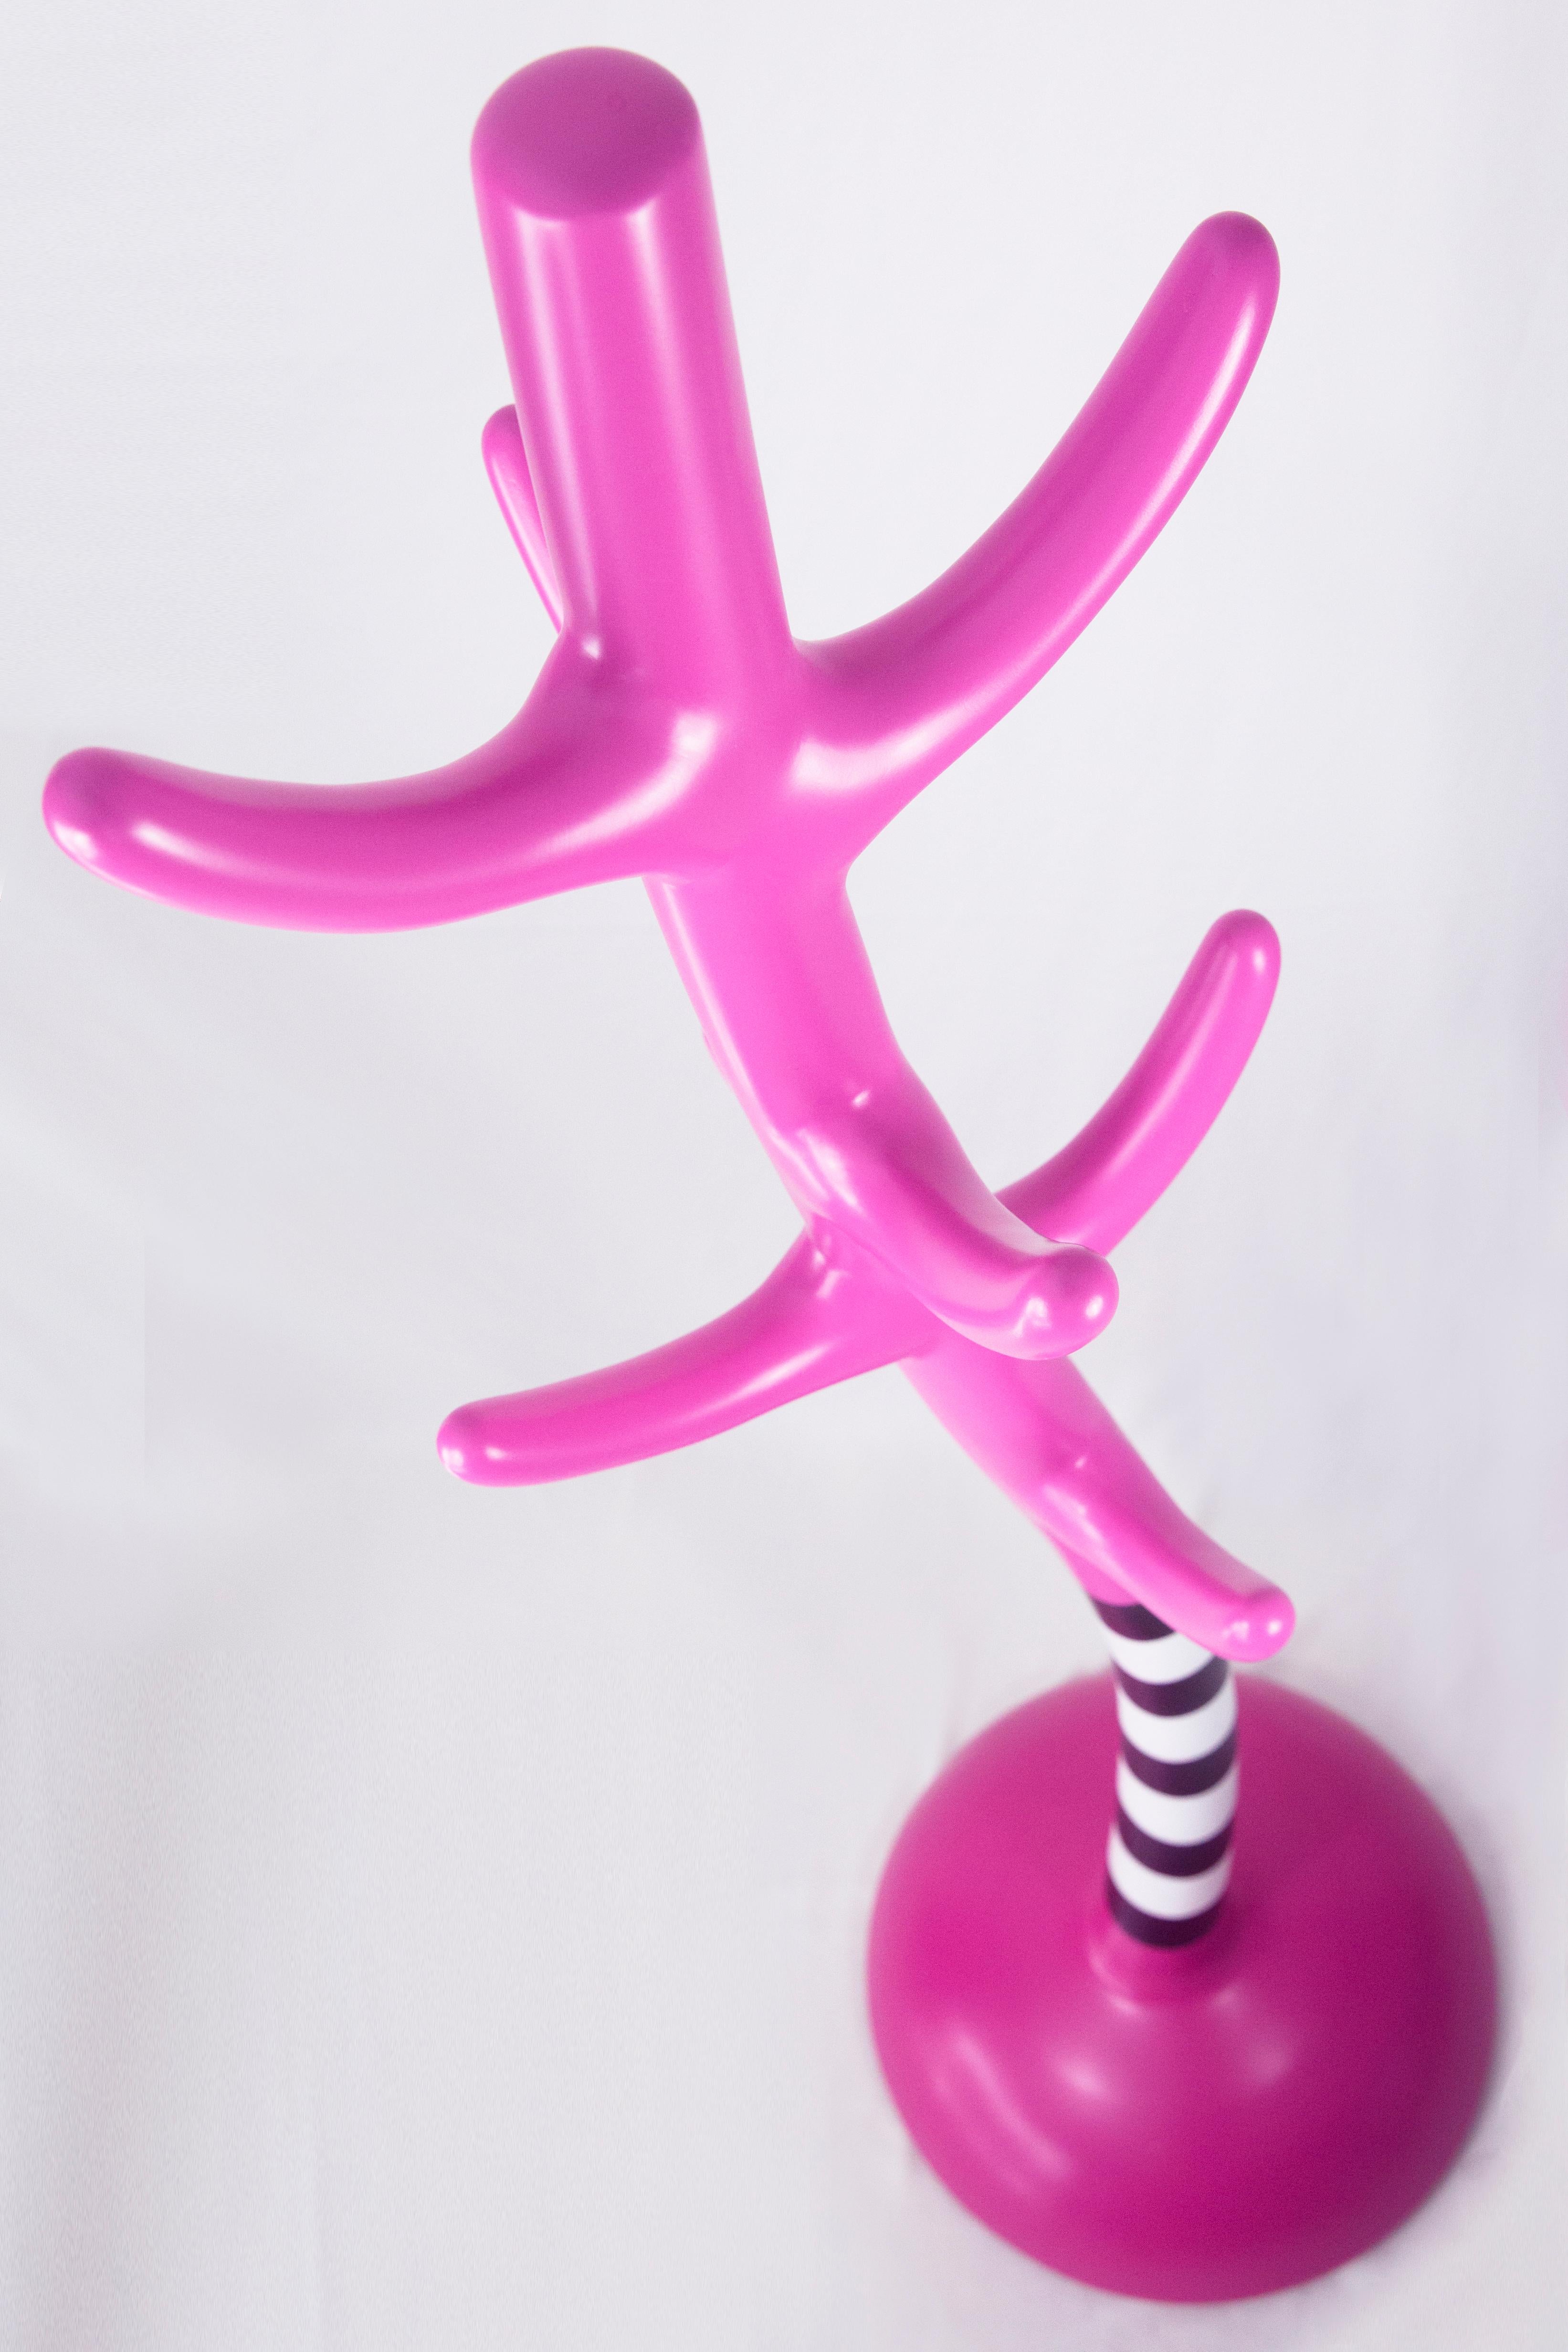 Turkish Crooked Pink Colourful Coat Rack, Amorphous Sculpture, Artistic For Sale